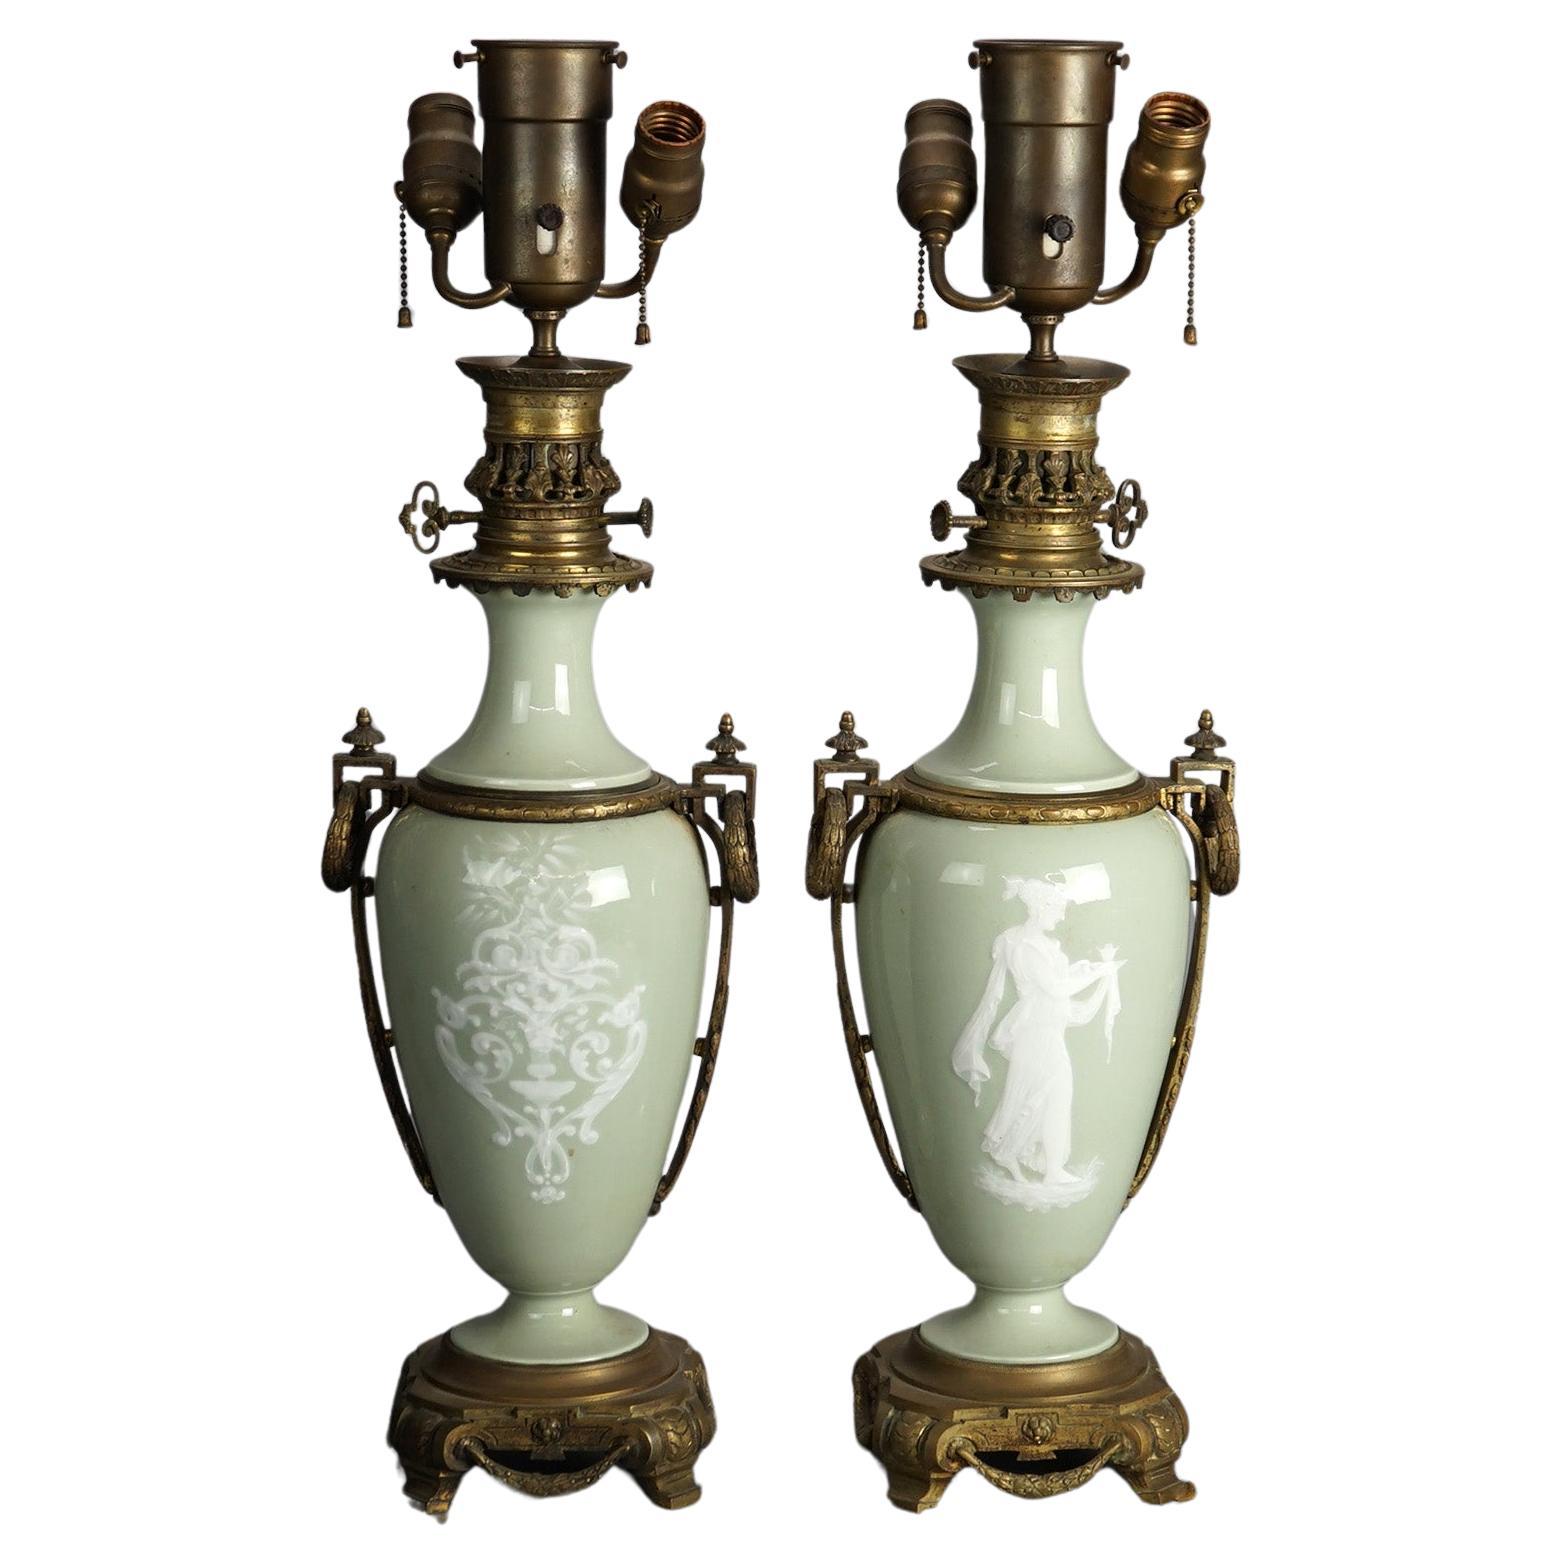 Antique Pair of French Cameo Triple Socket Table Lamps with Gilt Foliate Cast Bronze Bases & Mounts with Celadon Porcelain Urn Form Fonts with Figures, Circa 1920

Measures- 31.5''H x 9.5''W x 6''D